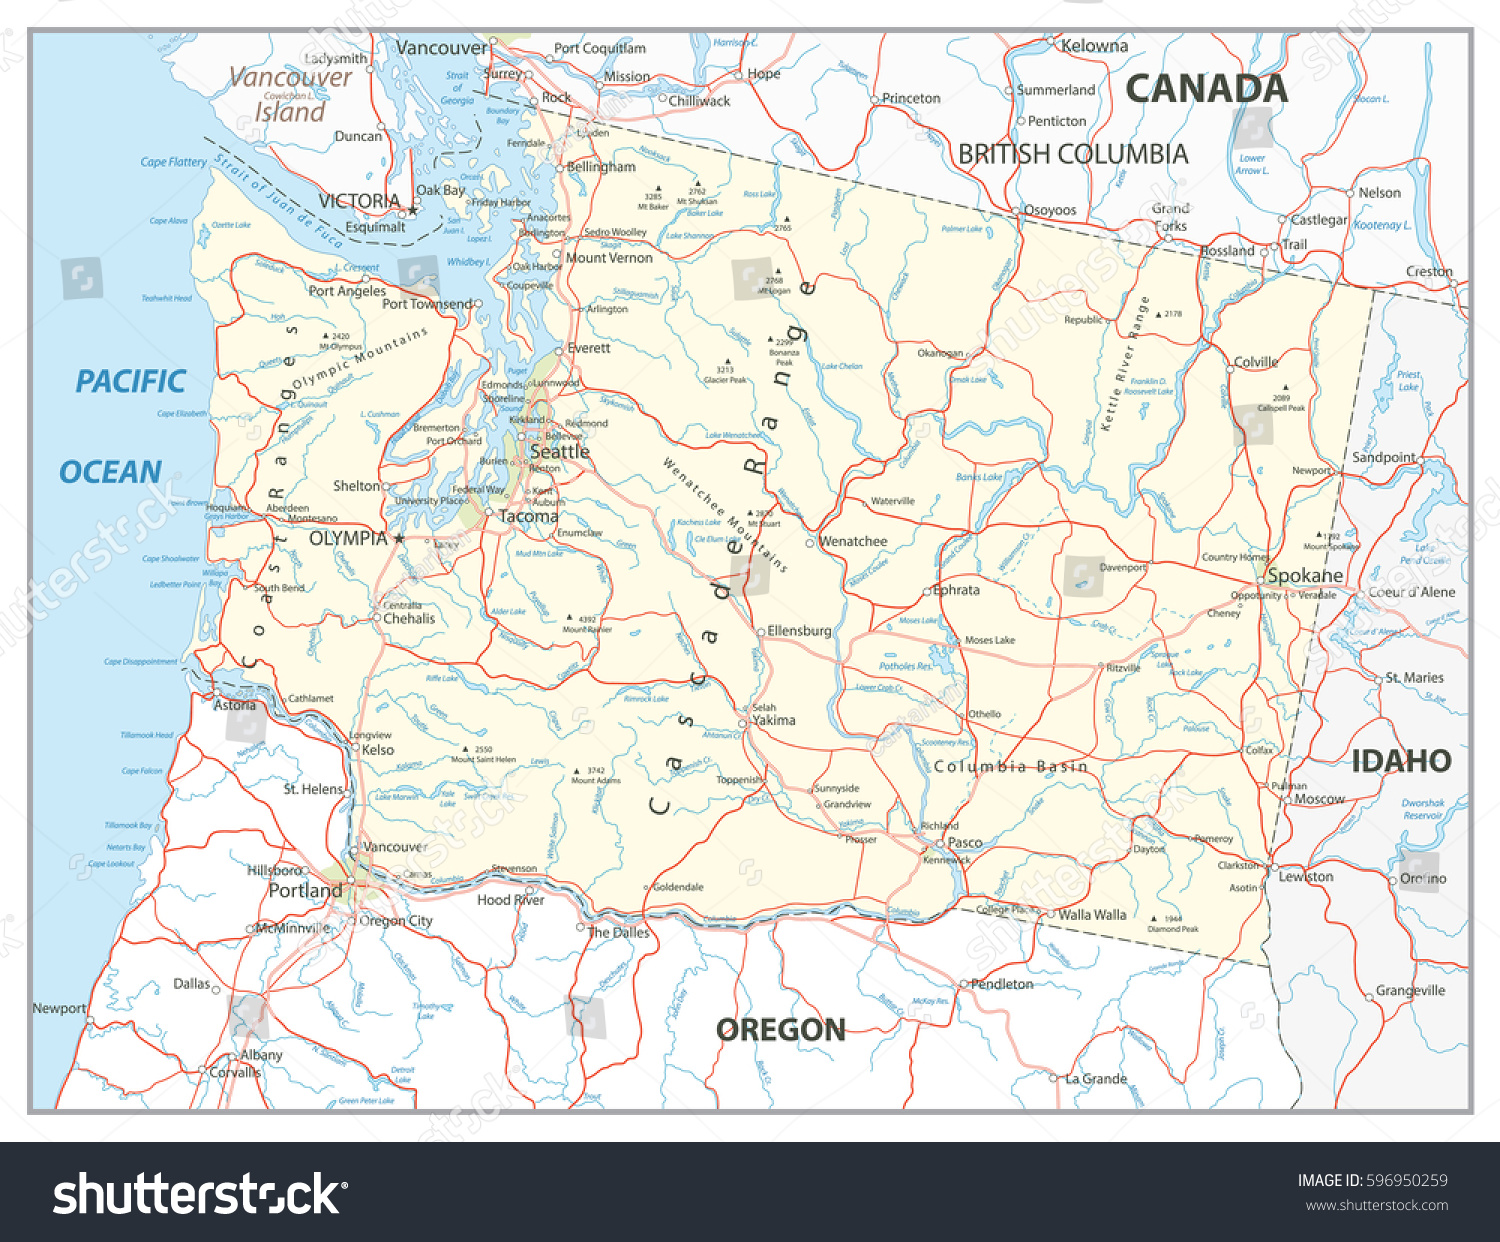 SVG of Washington state map with roads, rivers, lakes and highways. svg